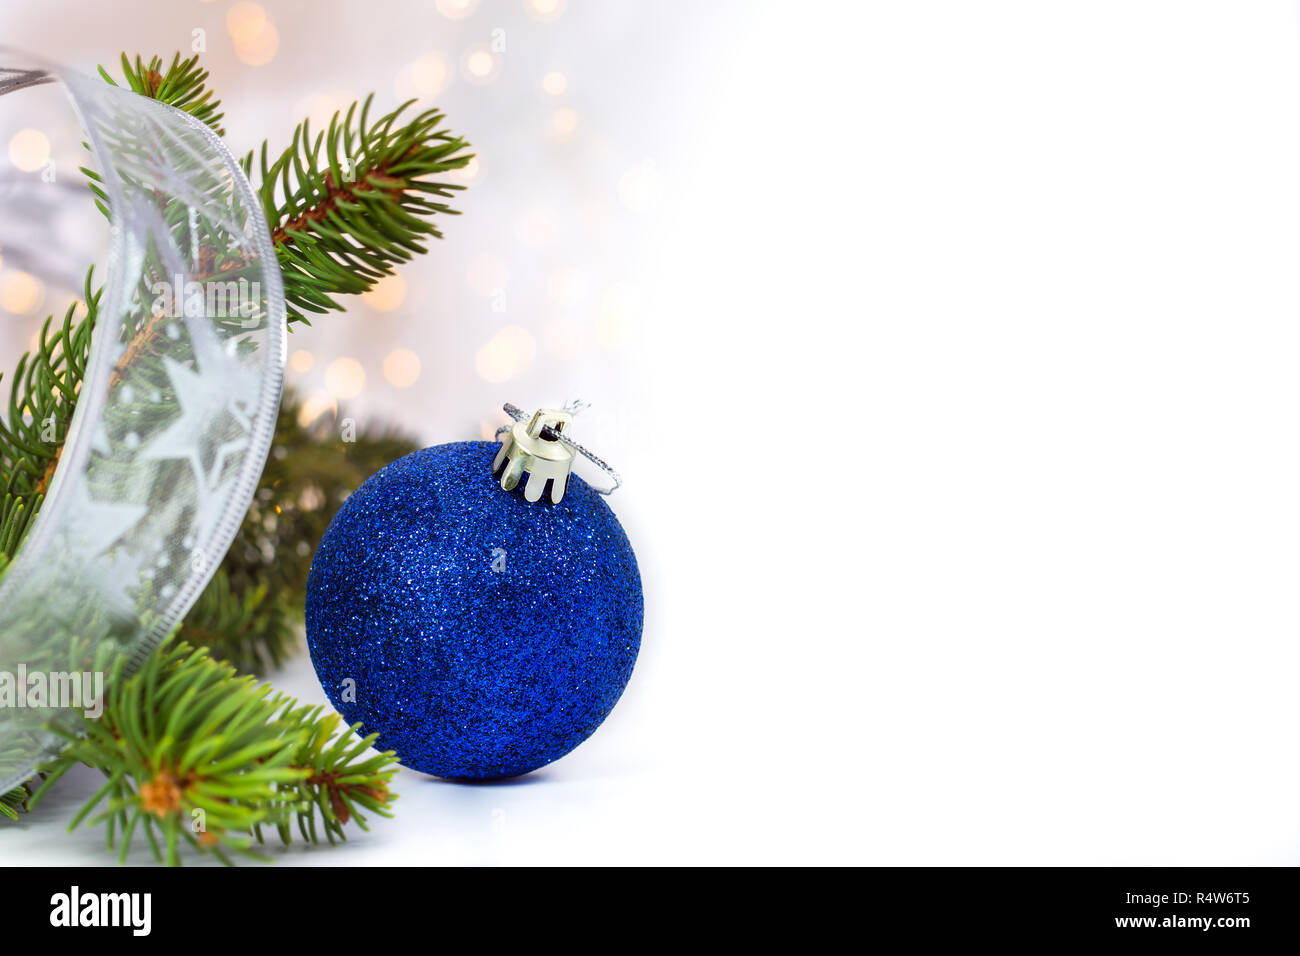 Blue glitter Christmas ball, branch of tree fir and silver ribbon on white background with copy space for text.Selective focus. Stock Photo